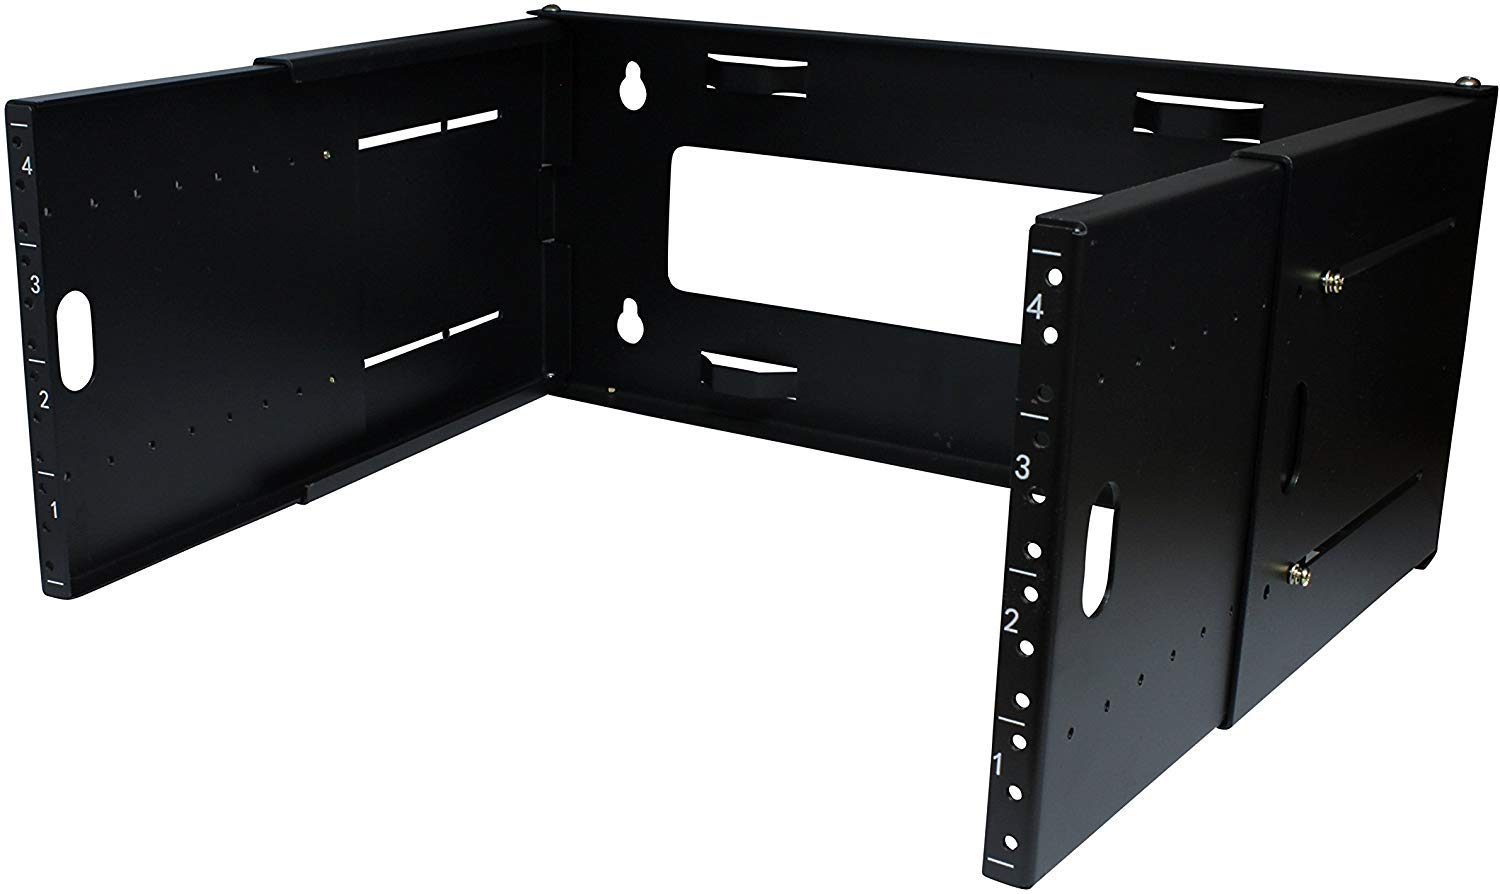 Ares Vision 19 Inch Wide 4U Heavy Duty Steel Extendable Wall Mount Bracket Rack for Network Equipment (4U)